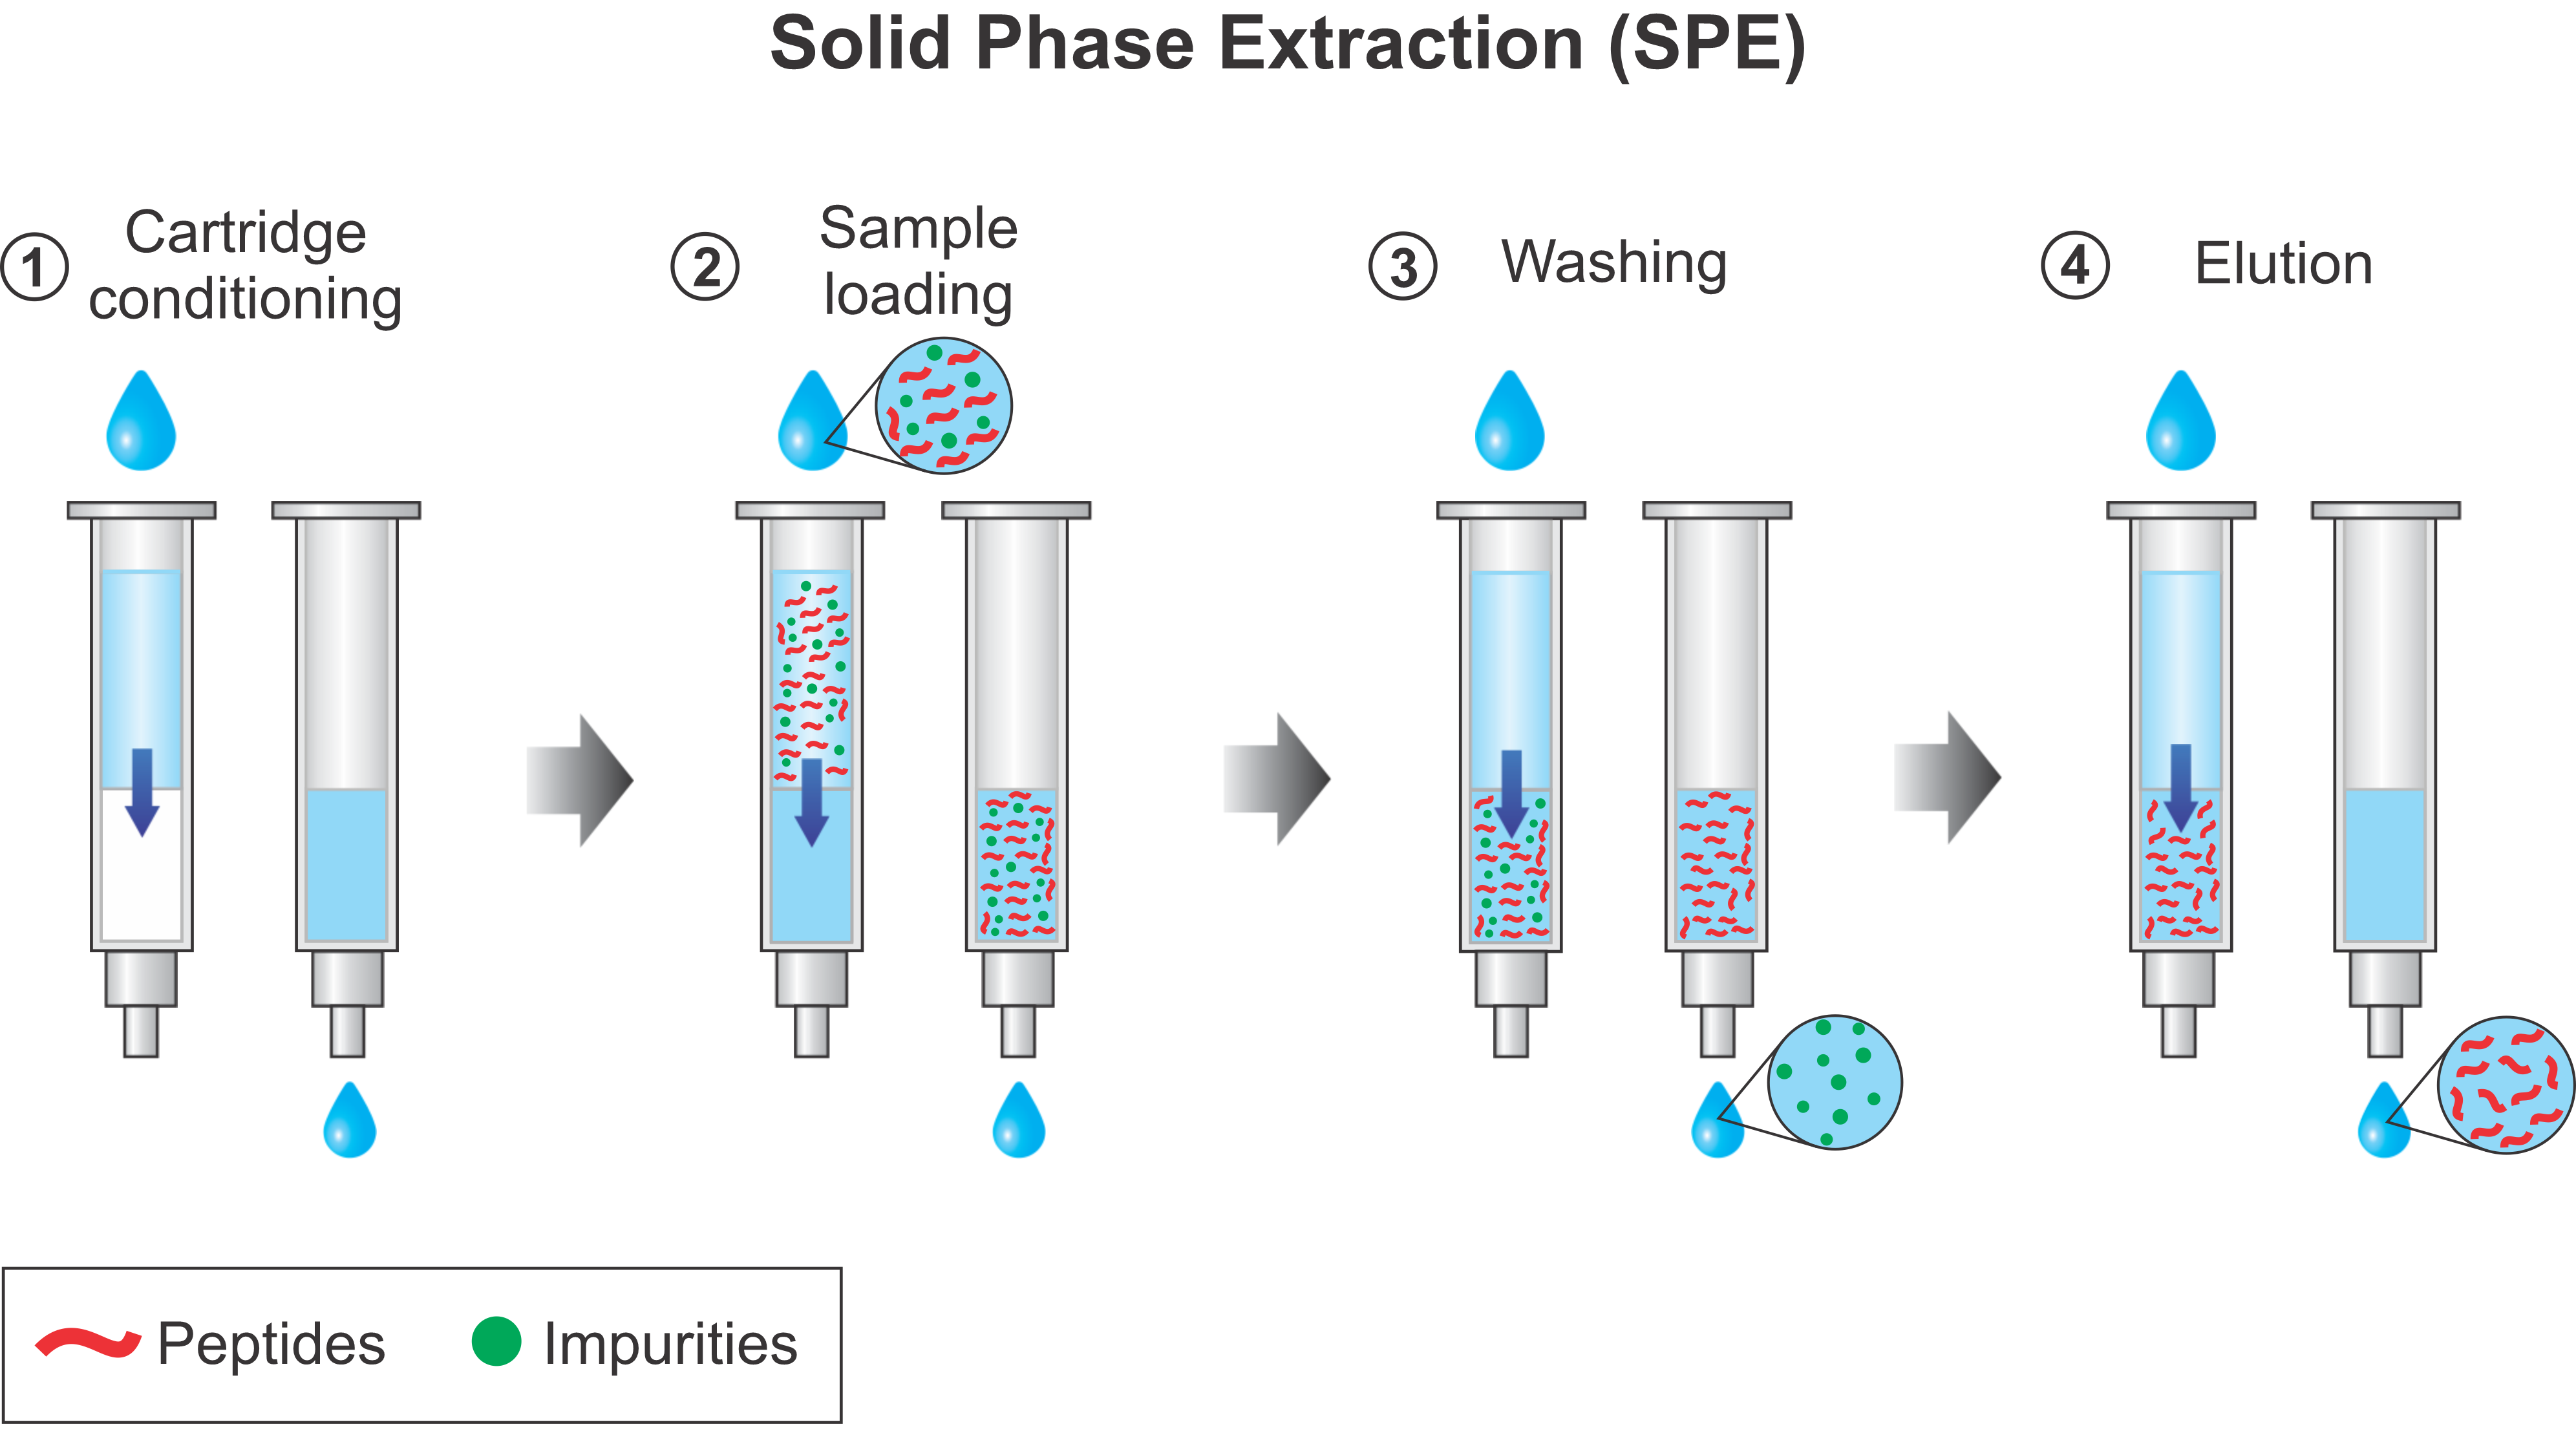 Figure 5: Solid phase extraction (SPE). SPE is a sample preparation technique that uses a solid adsorbent contained most commonly in a cartridge device to selectively adsorb certain molecules from solution. The first step is the conditioning of the cartridge which involves wetting the adsorbent to solvate its functional groups and filling the void spaces with solvent thereby removing any air in the column. This is necessary to produce a suitable environment for adsorption and thus ensure reproducible interaction with the analytes. After conditioning, the sample is loaded in the cartridge. This can be performed with the aid of positive or negative pressure to ensure a constant flow rate. In this step molecules bind the adsorbent and interferences pass through. Next, the column is washed with the mobile phase to eliminate the contaminants while ensuring the analyte remains bound. Finally, peptides are eluted in an appropriate buffer solution with polarity or charge that competes with interaction with the solid phase.